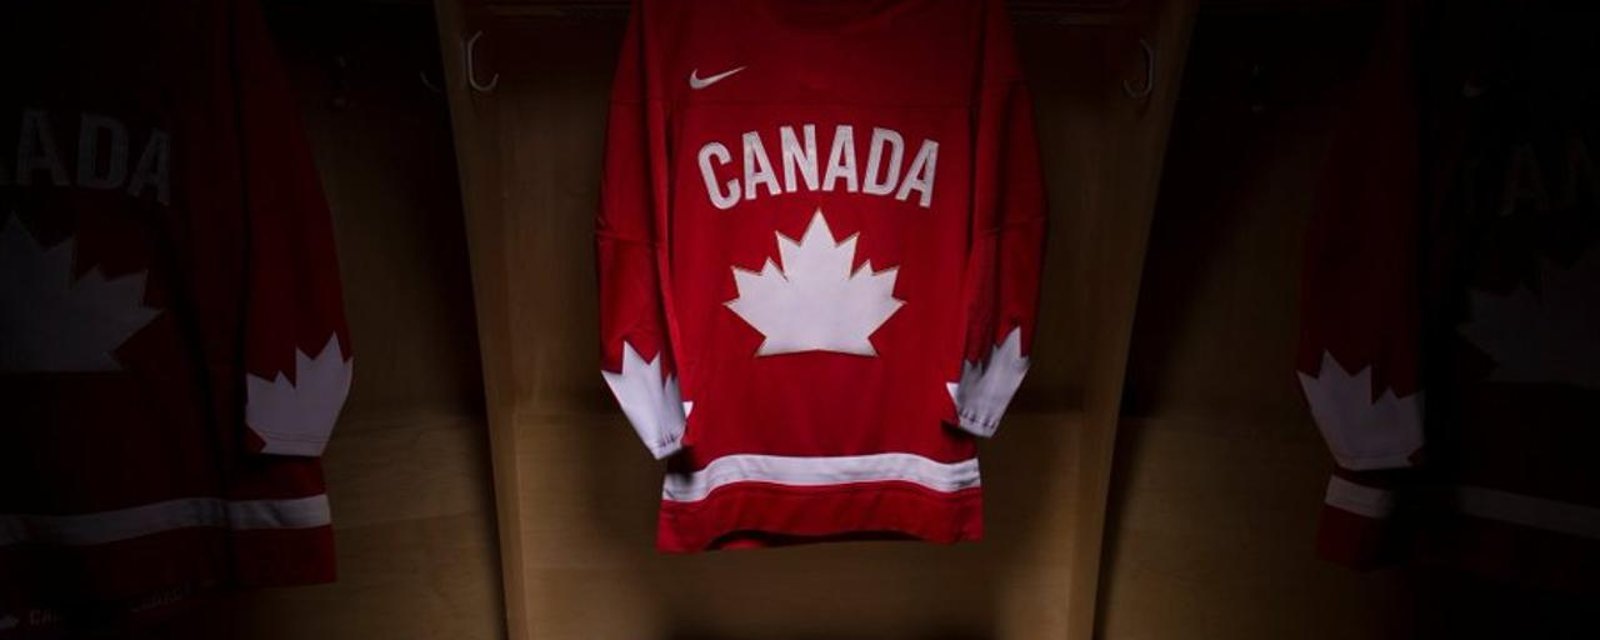 TEAM CANADA: “5 players” will face NHL suspensions for involvement in the 2018 sexual assault scandal